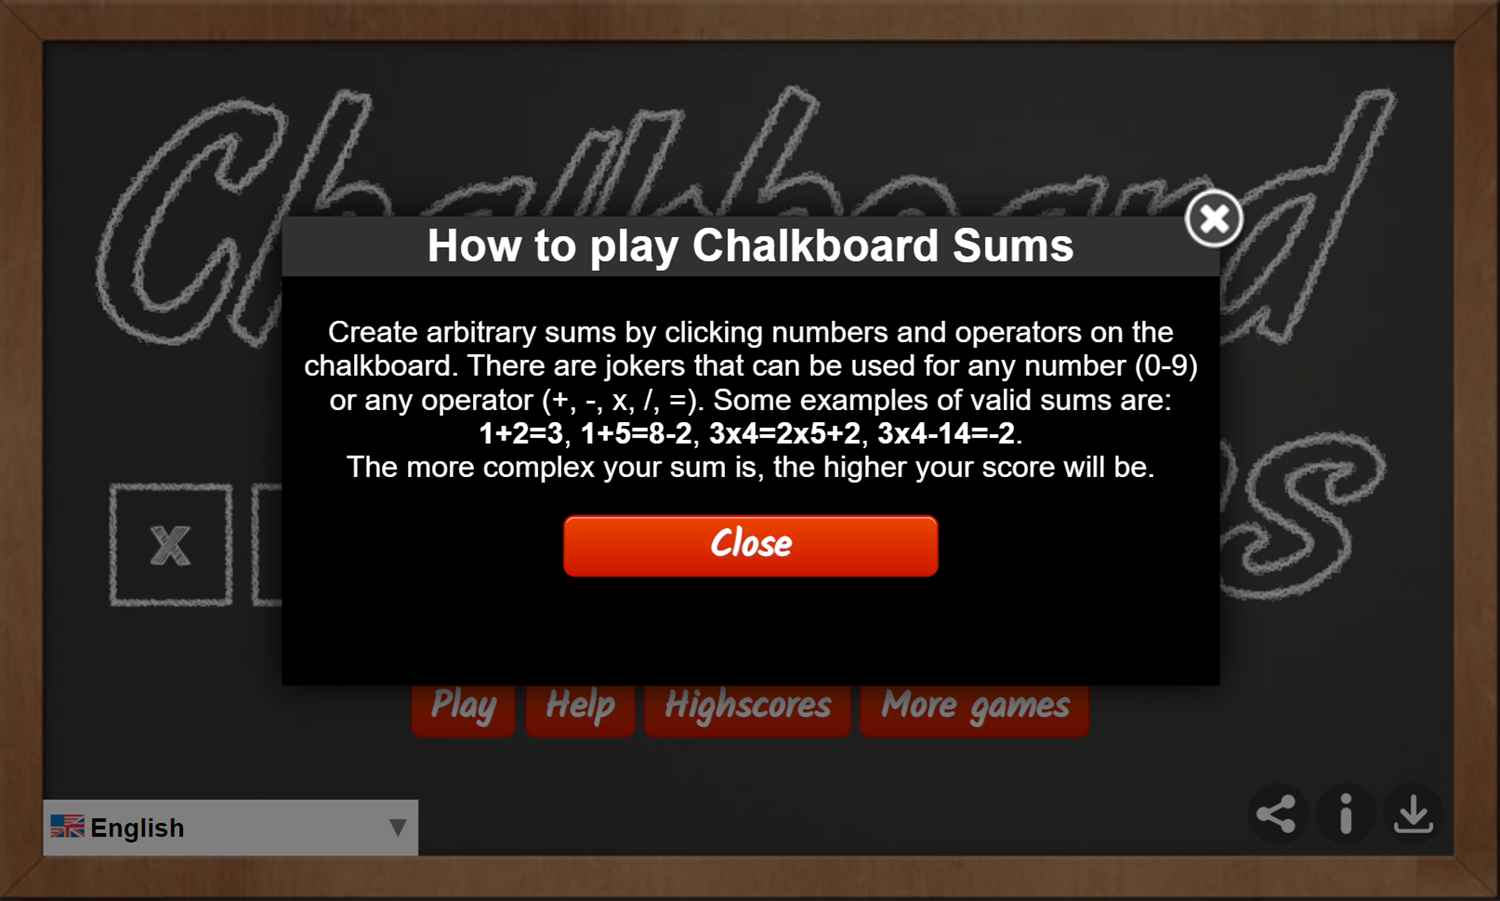 Chalkboard Sums Game How To Play Screenshot.